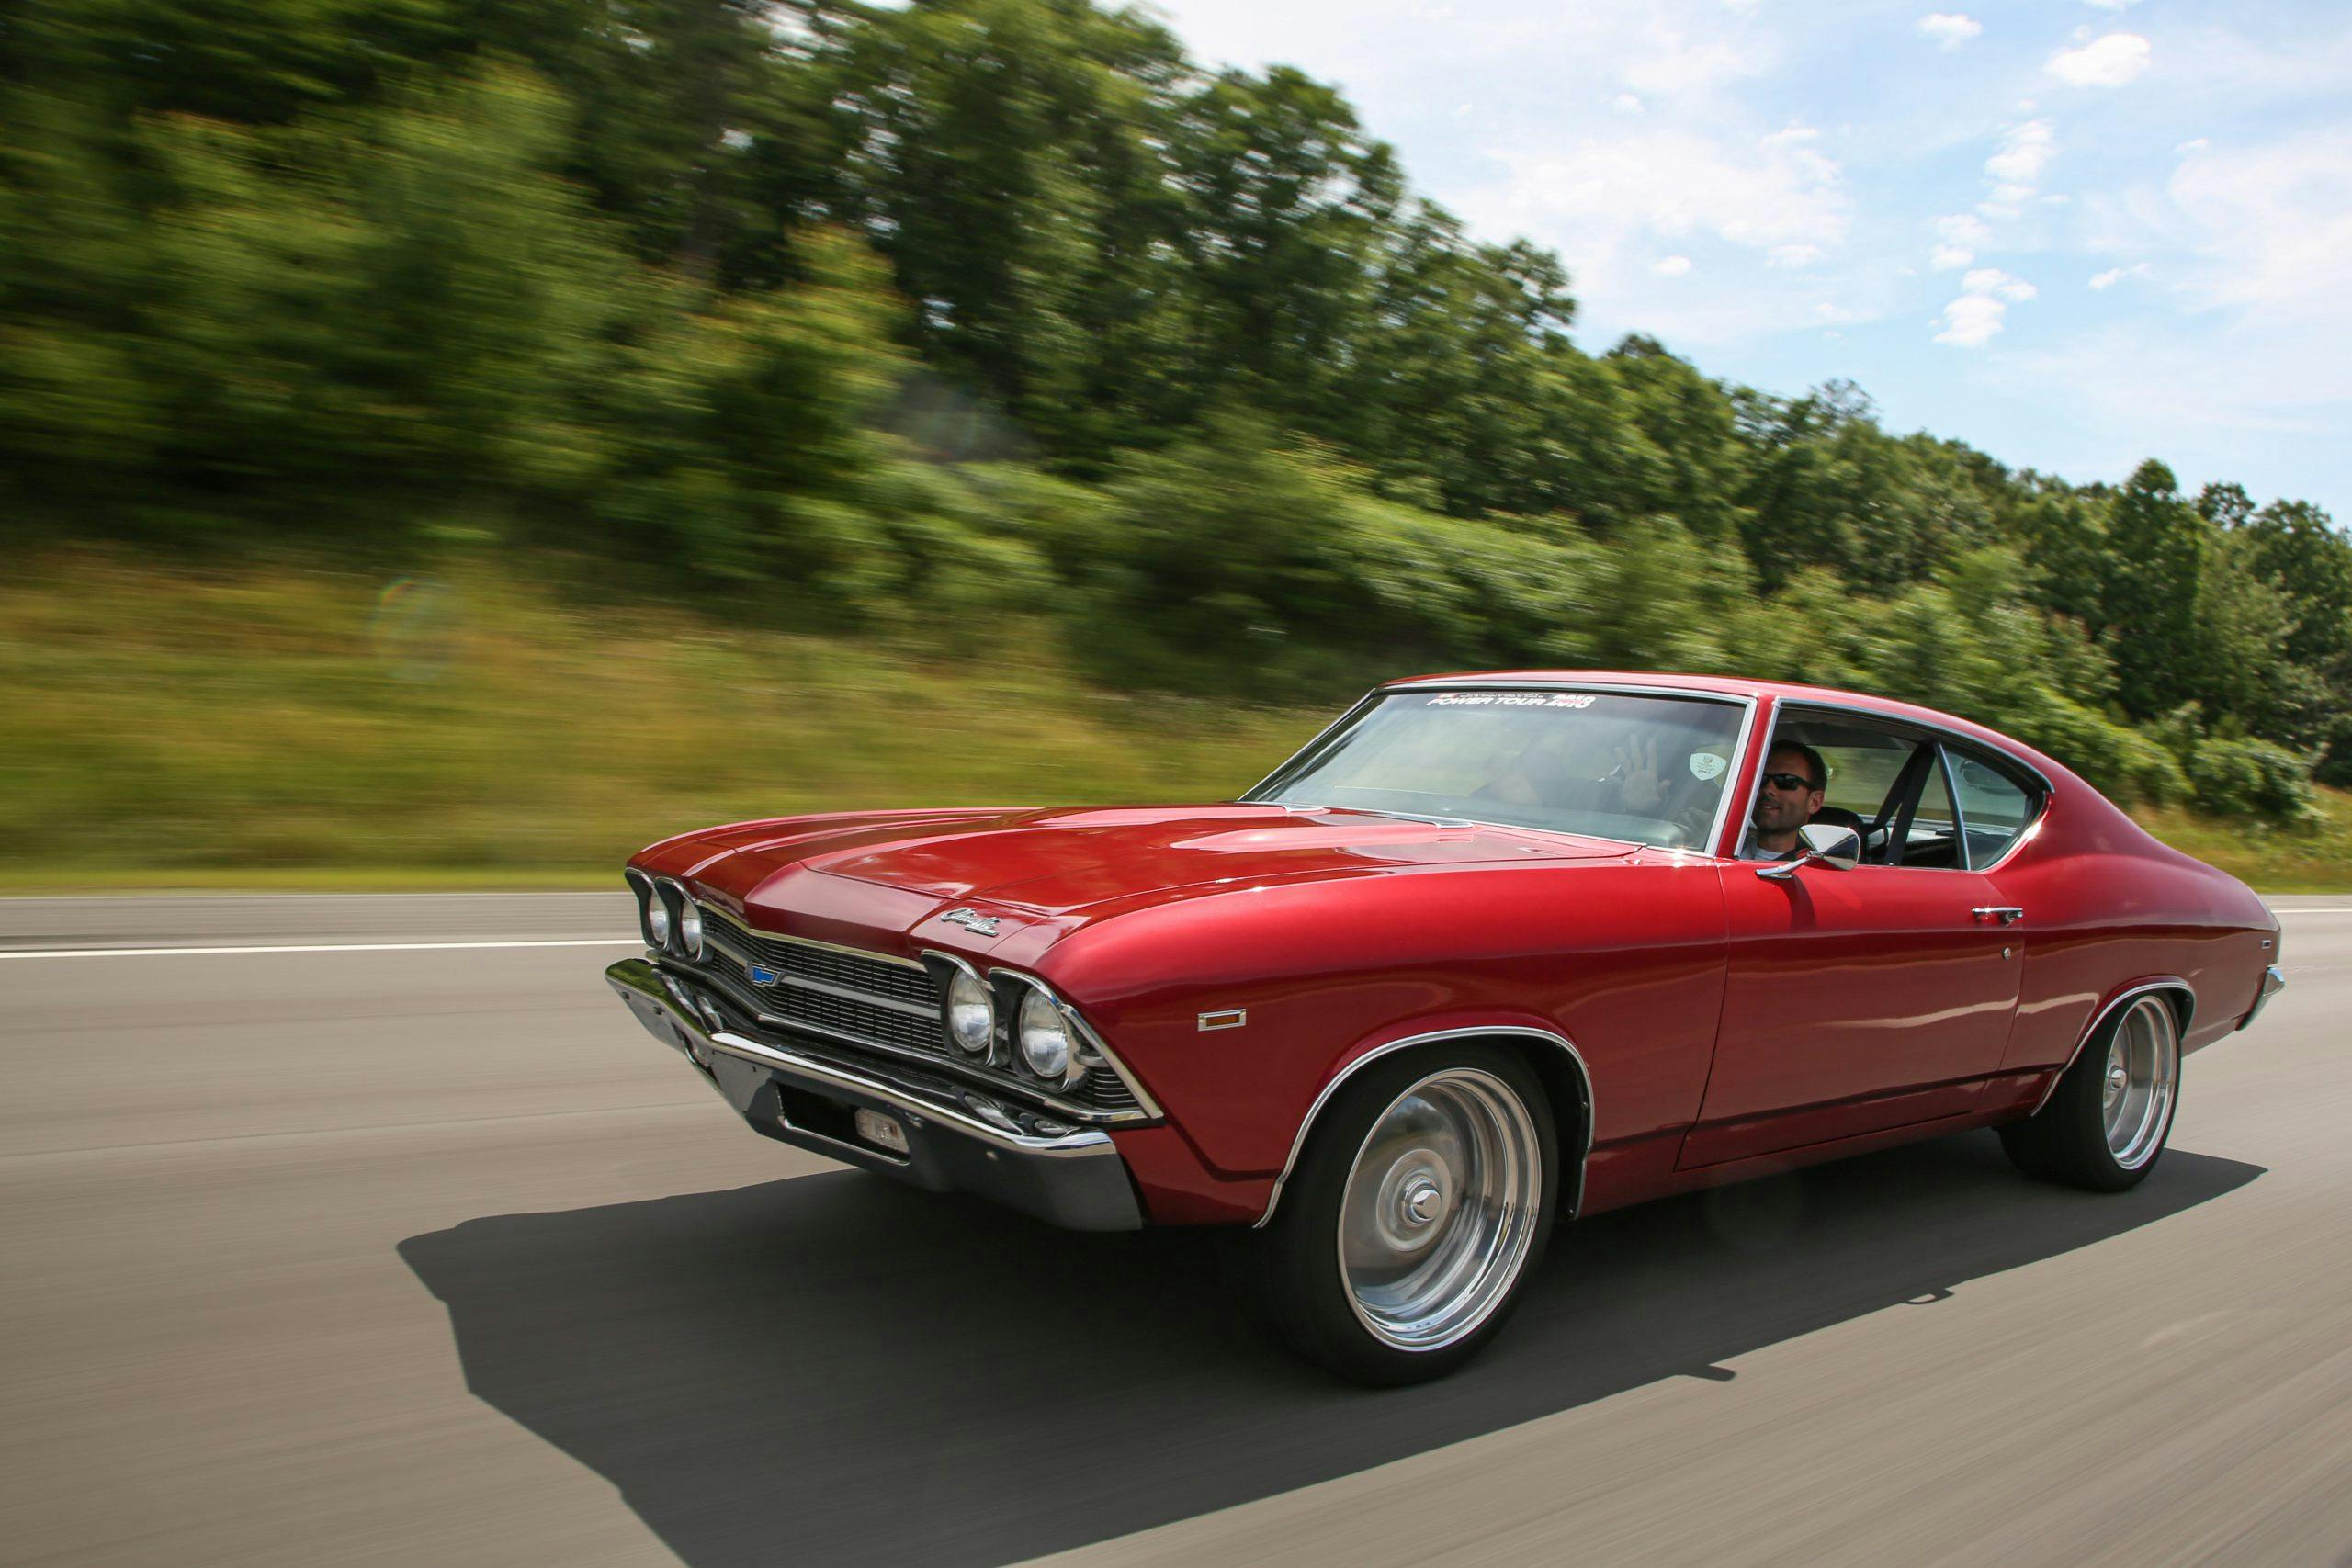 Chevy cruises down the road during Power Tour